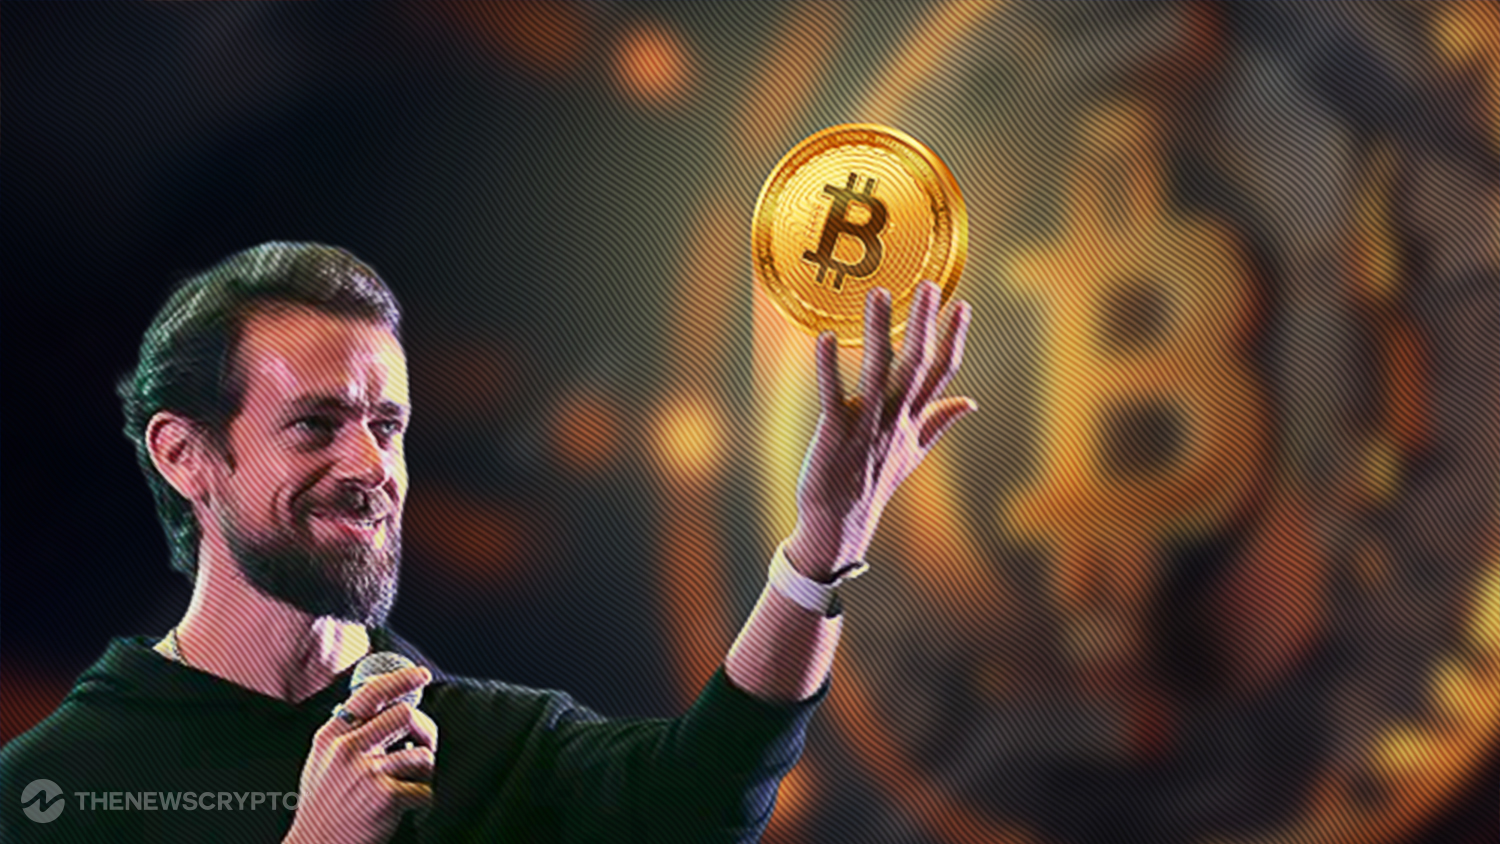 Twitter Co-founder Jack Dorsey Forecasts Bitcoin at $1 Million by 2030